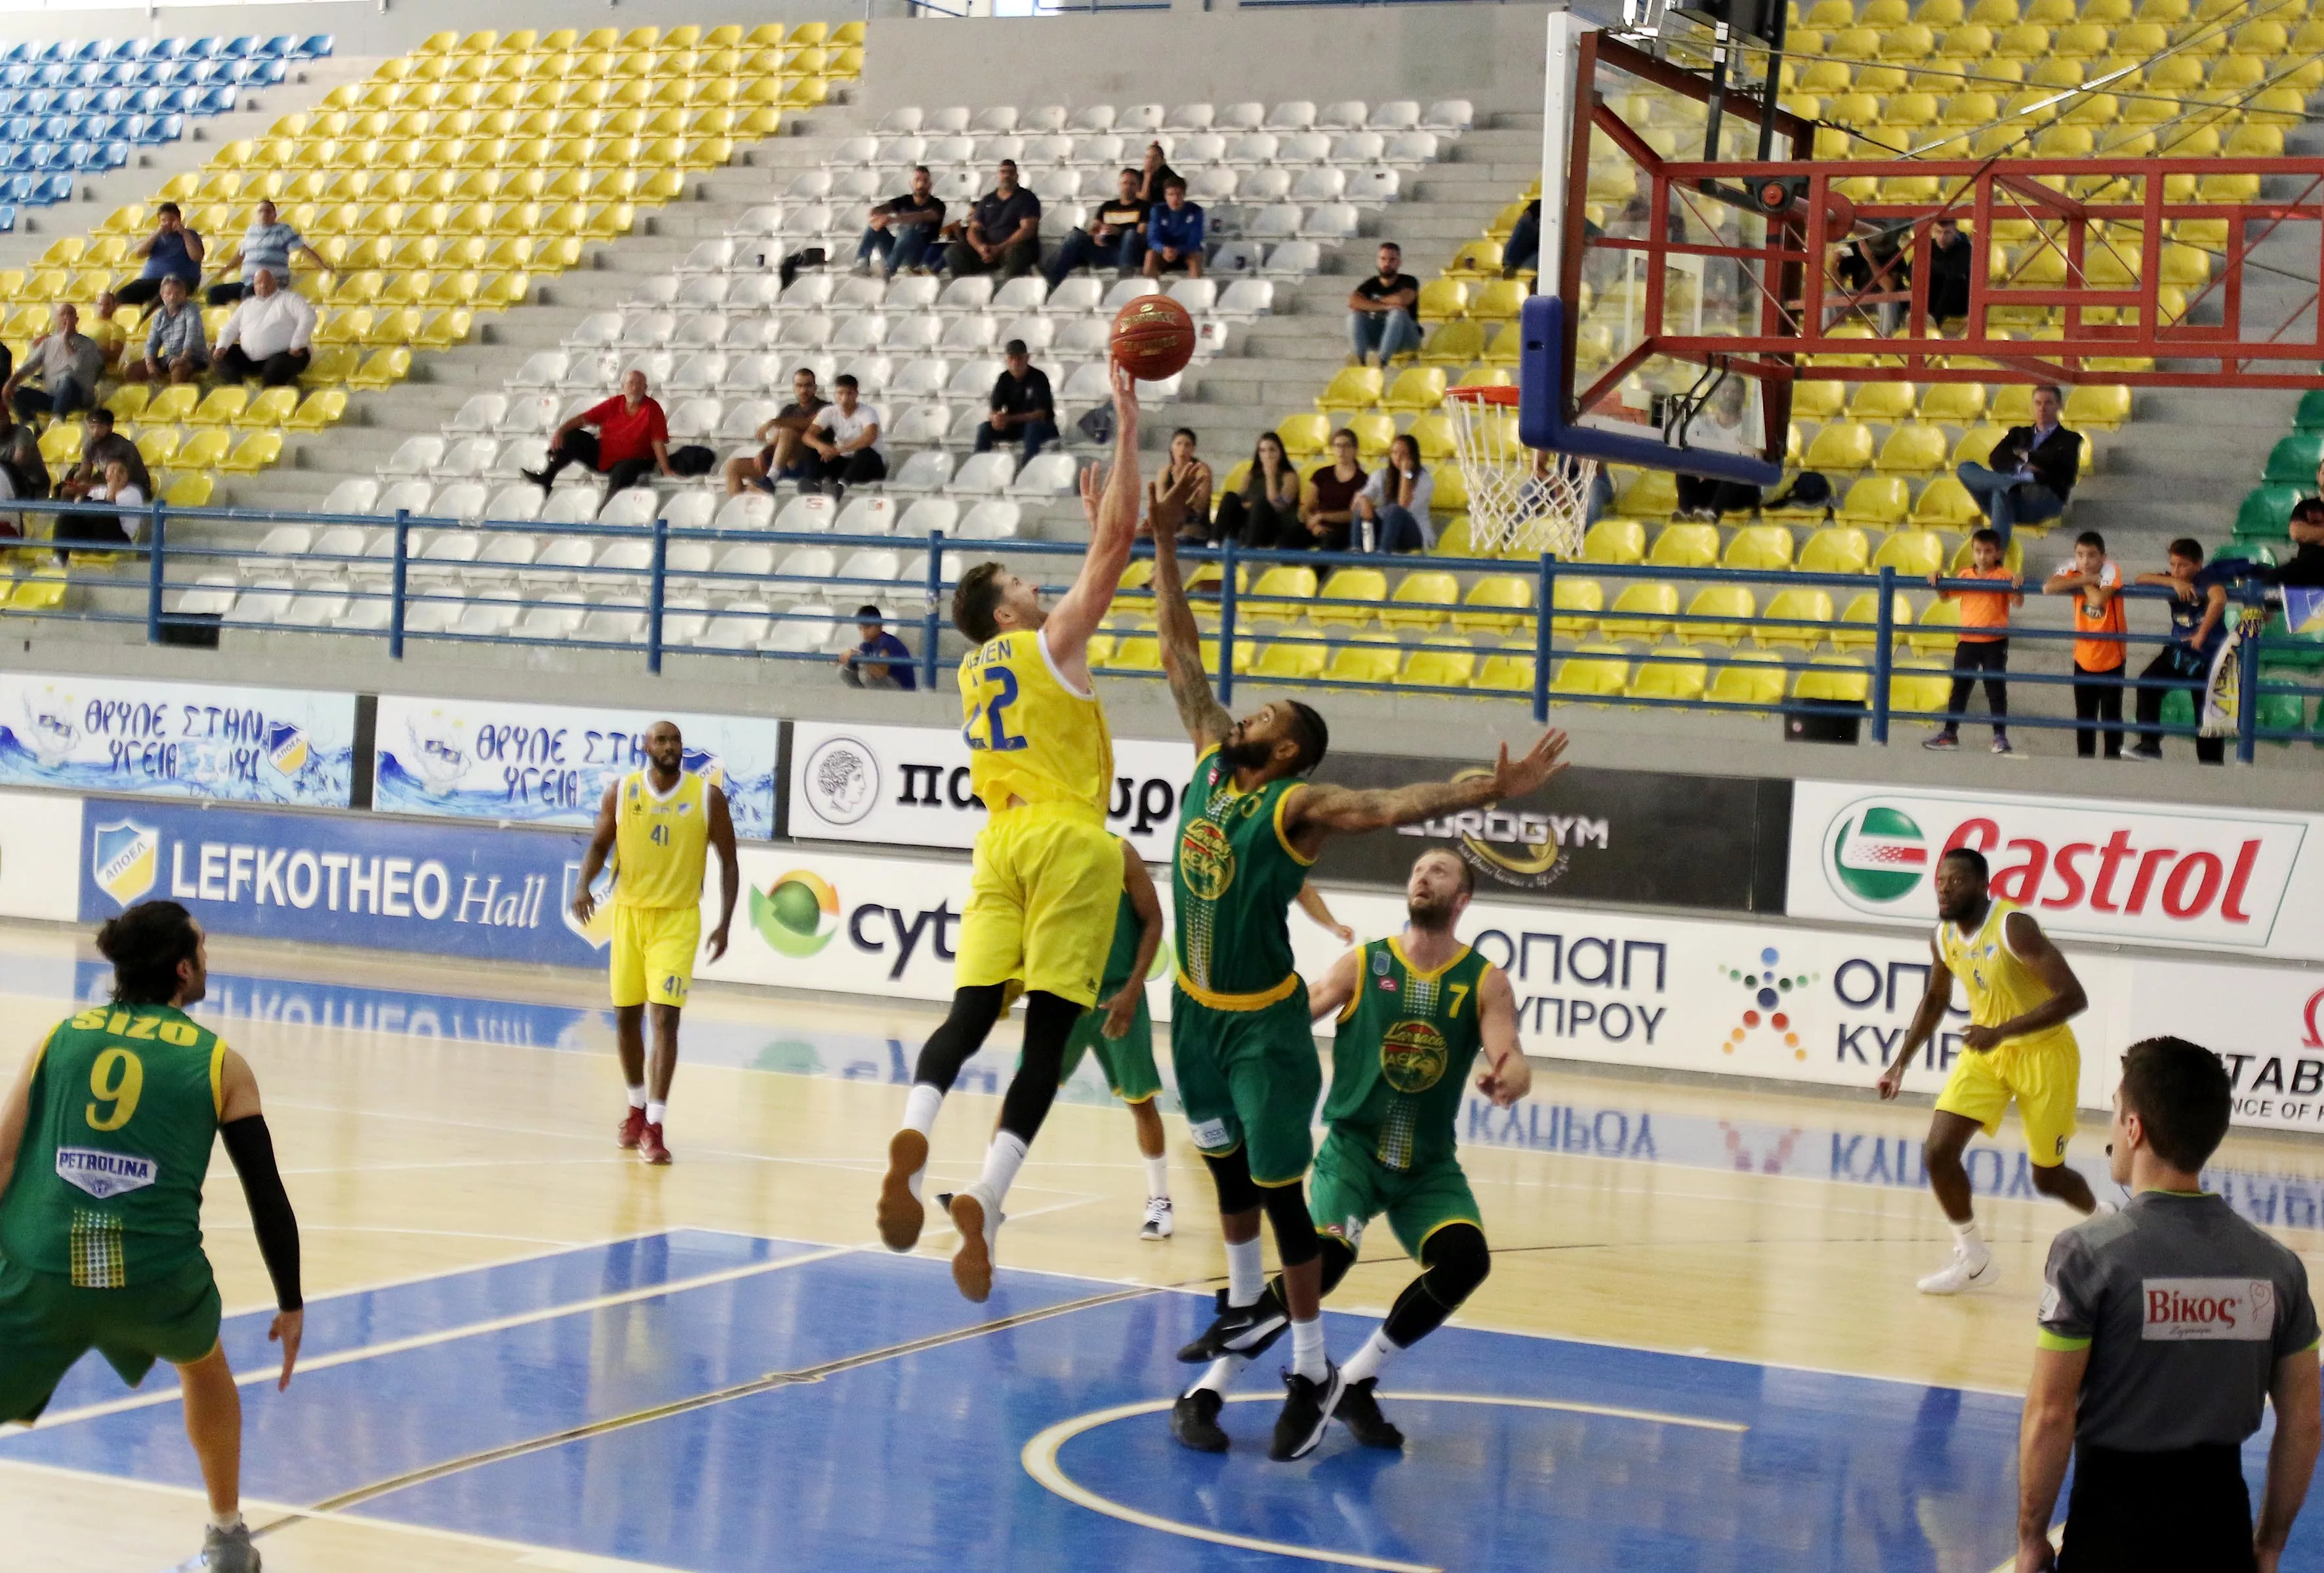 Lefkotheo in Cyprus, Europe | Basketball - Rated 0.7